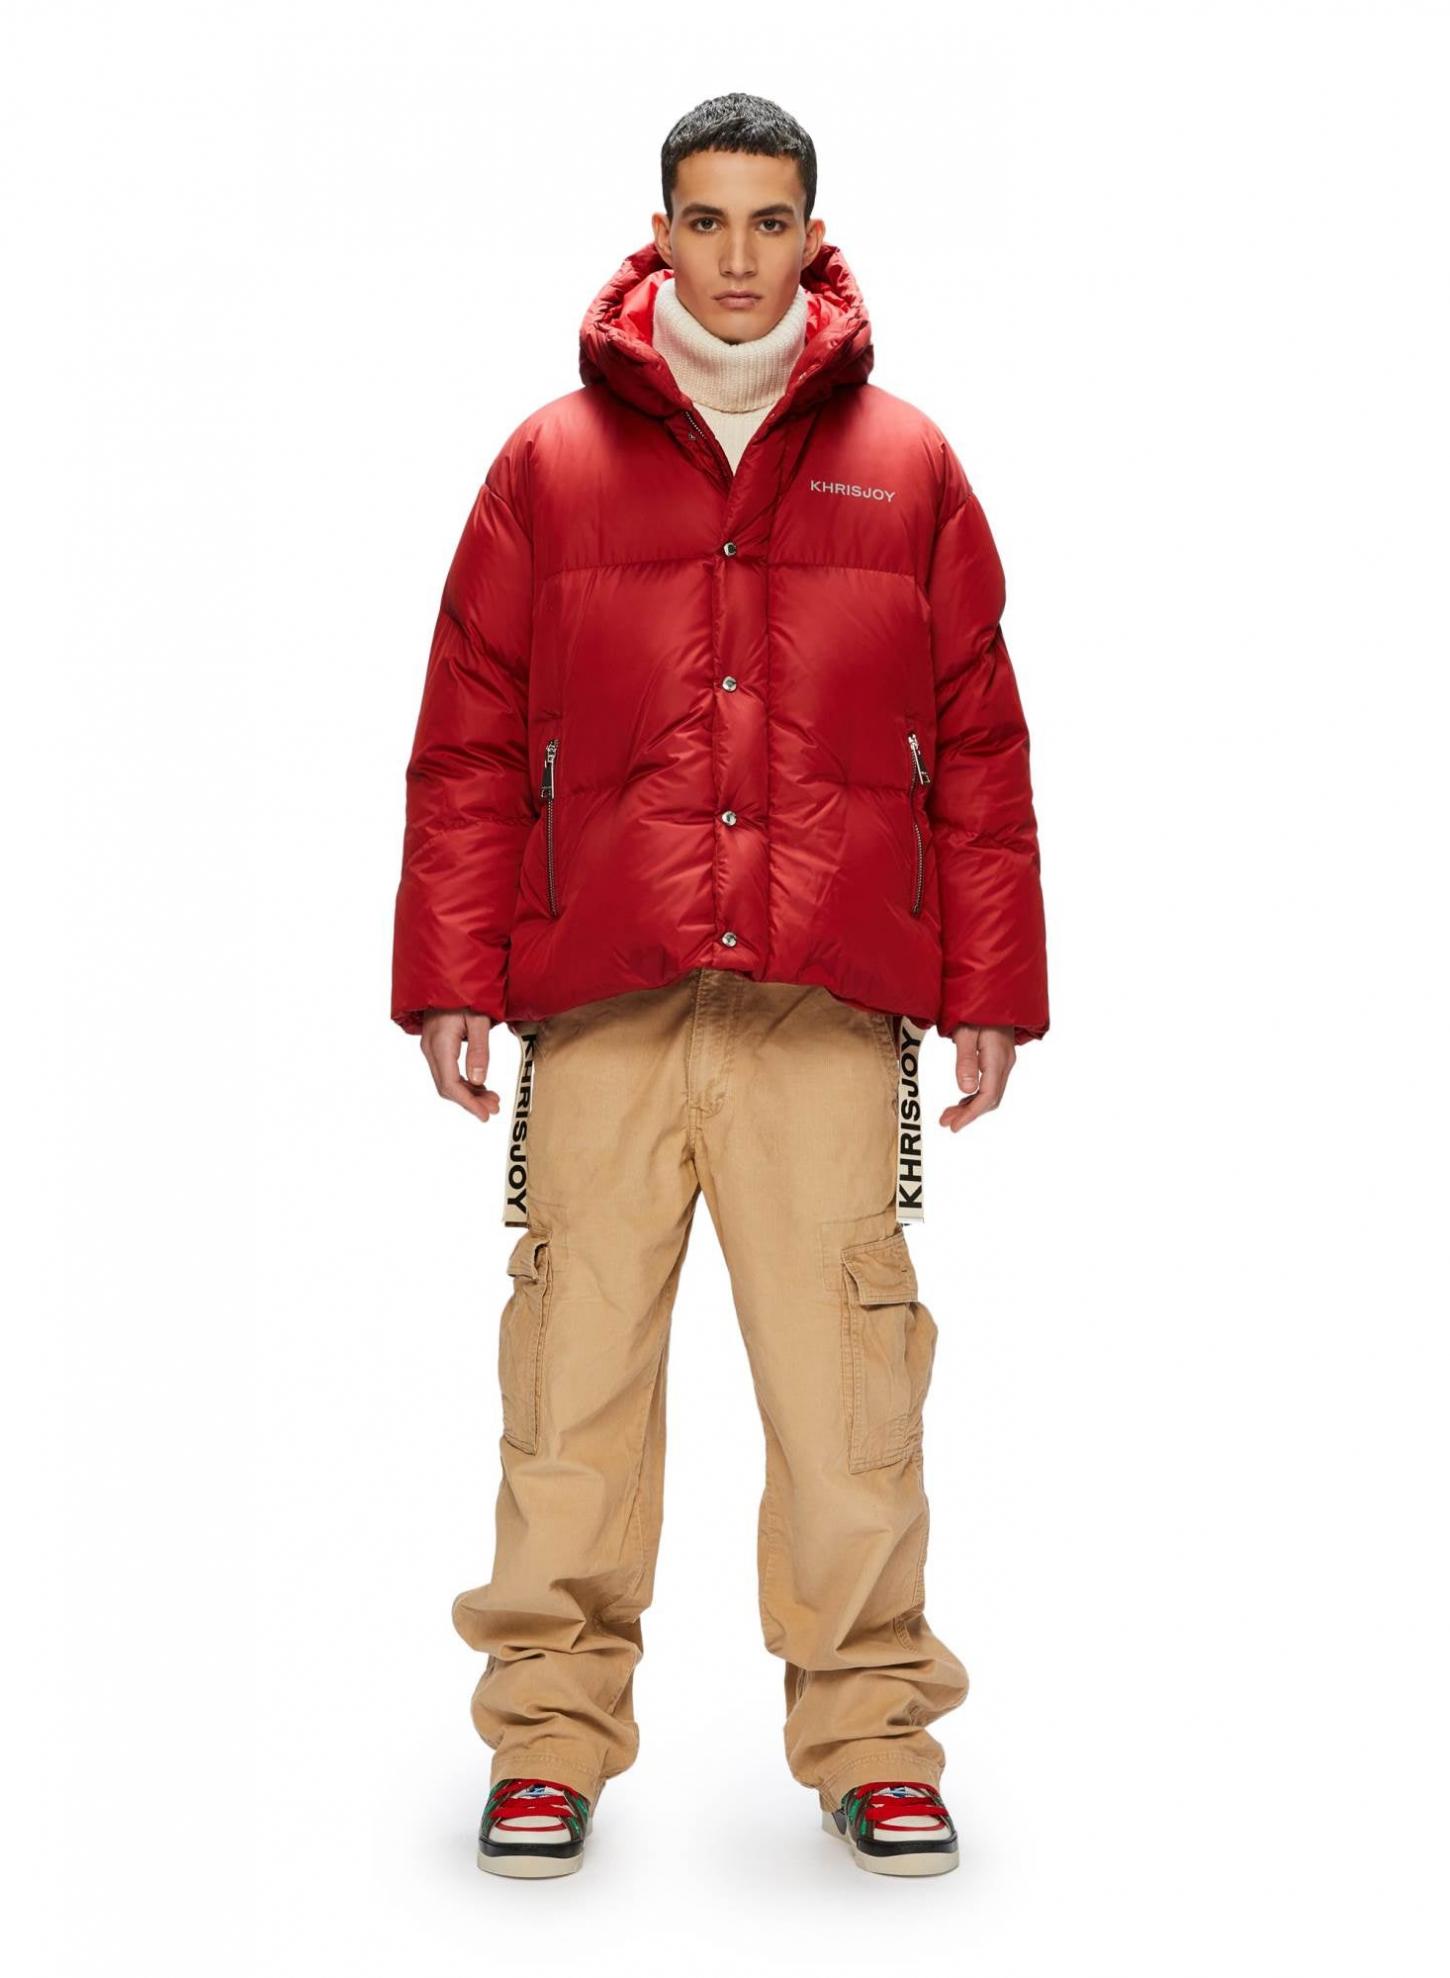 PUFF ICONIC KHRISMAN Red | KHRISJOY Mens Down Jackets